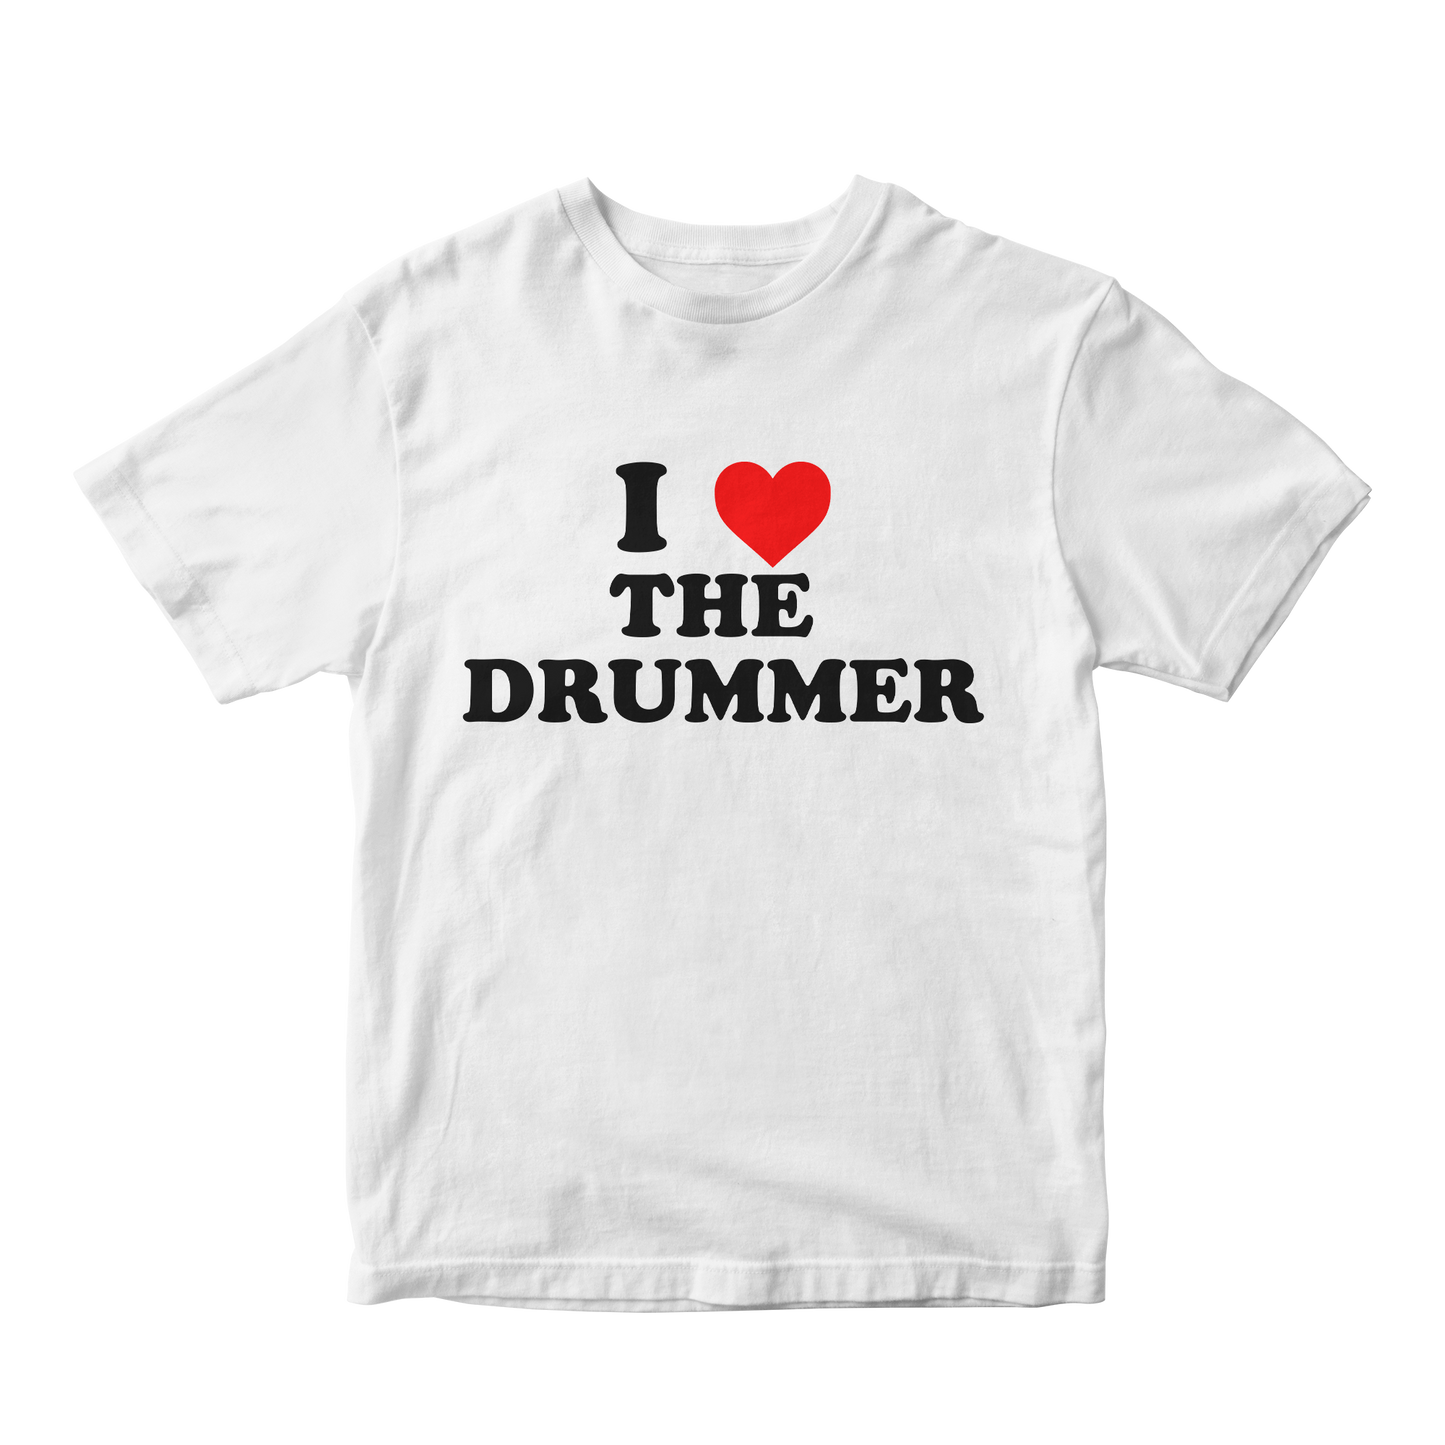 I ❤️ The Drummer Baby Tee